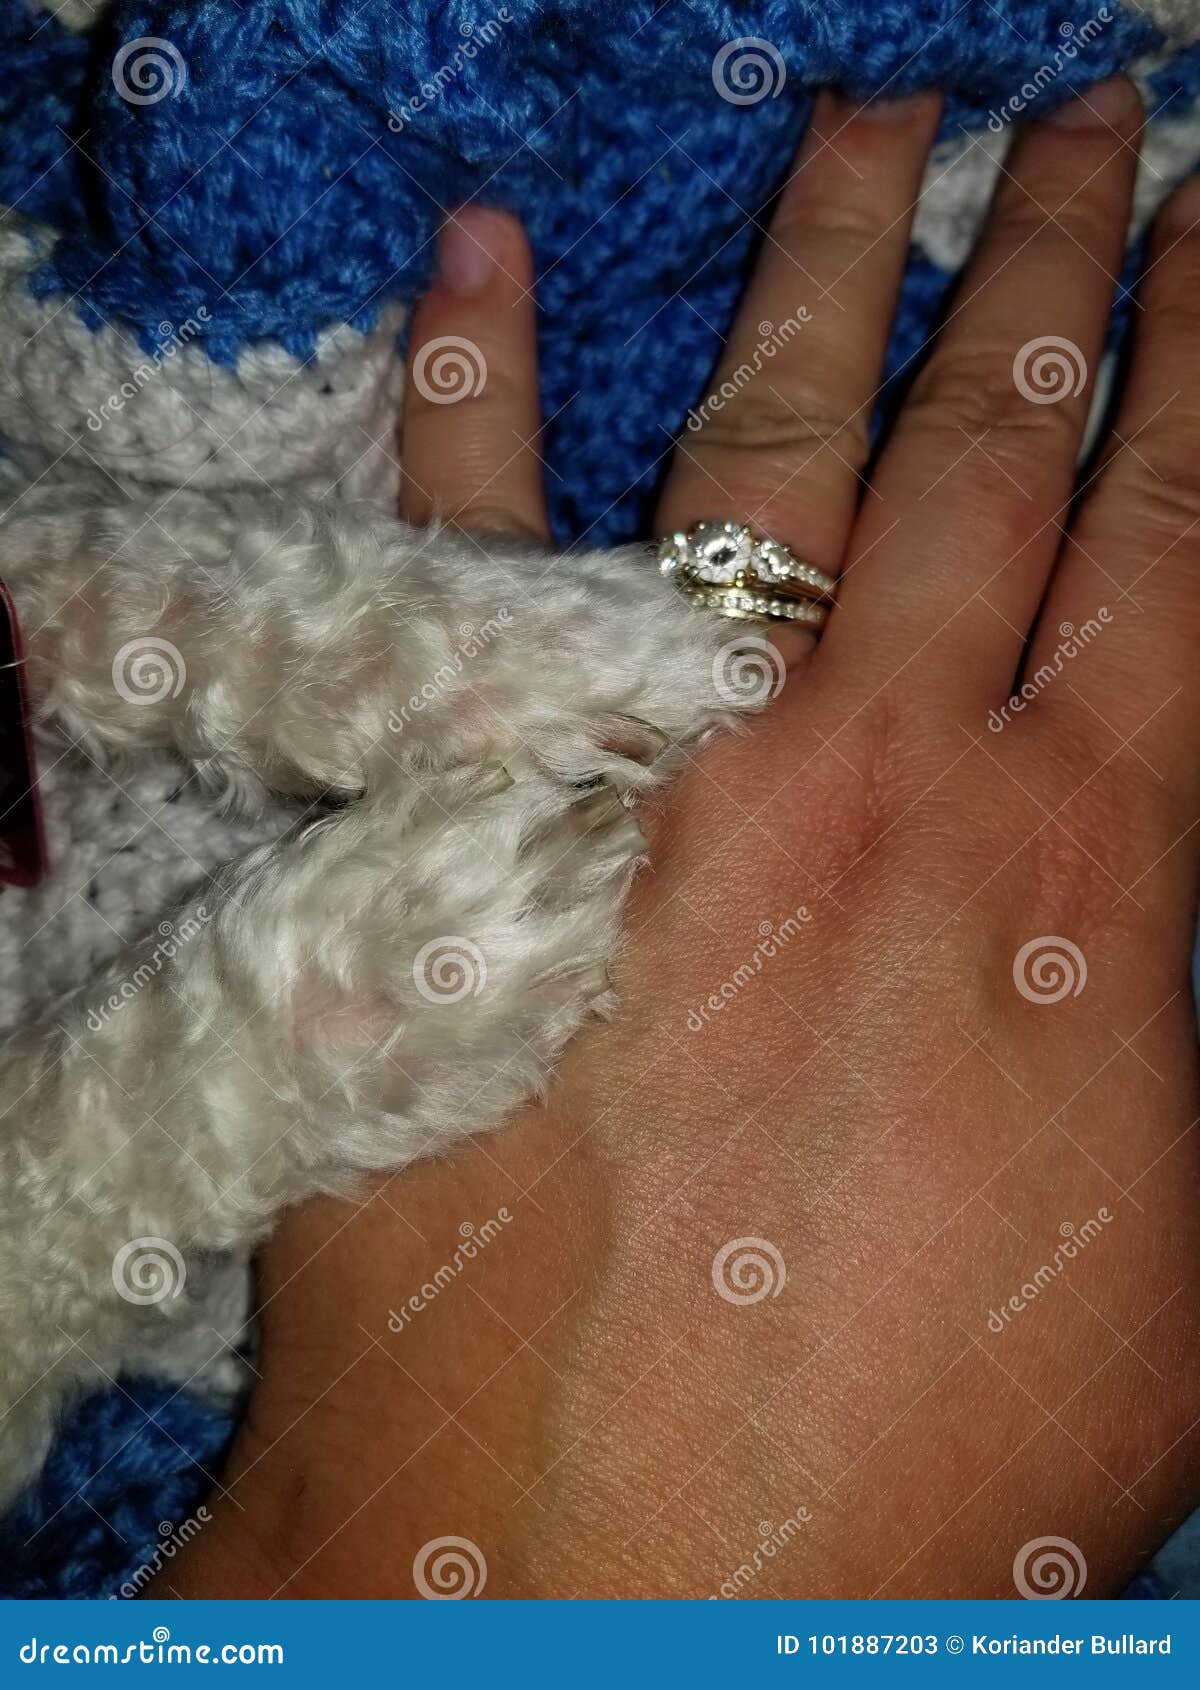 Dog paws on hand. Dog paws on a human hand with wedding rings